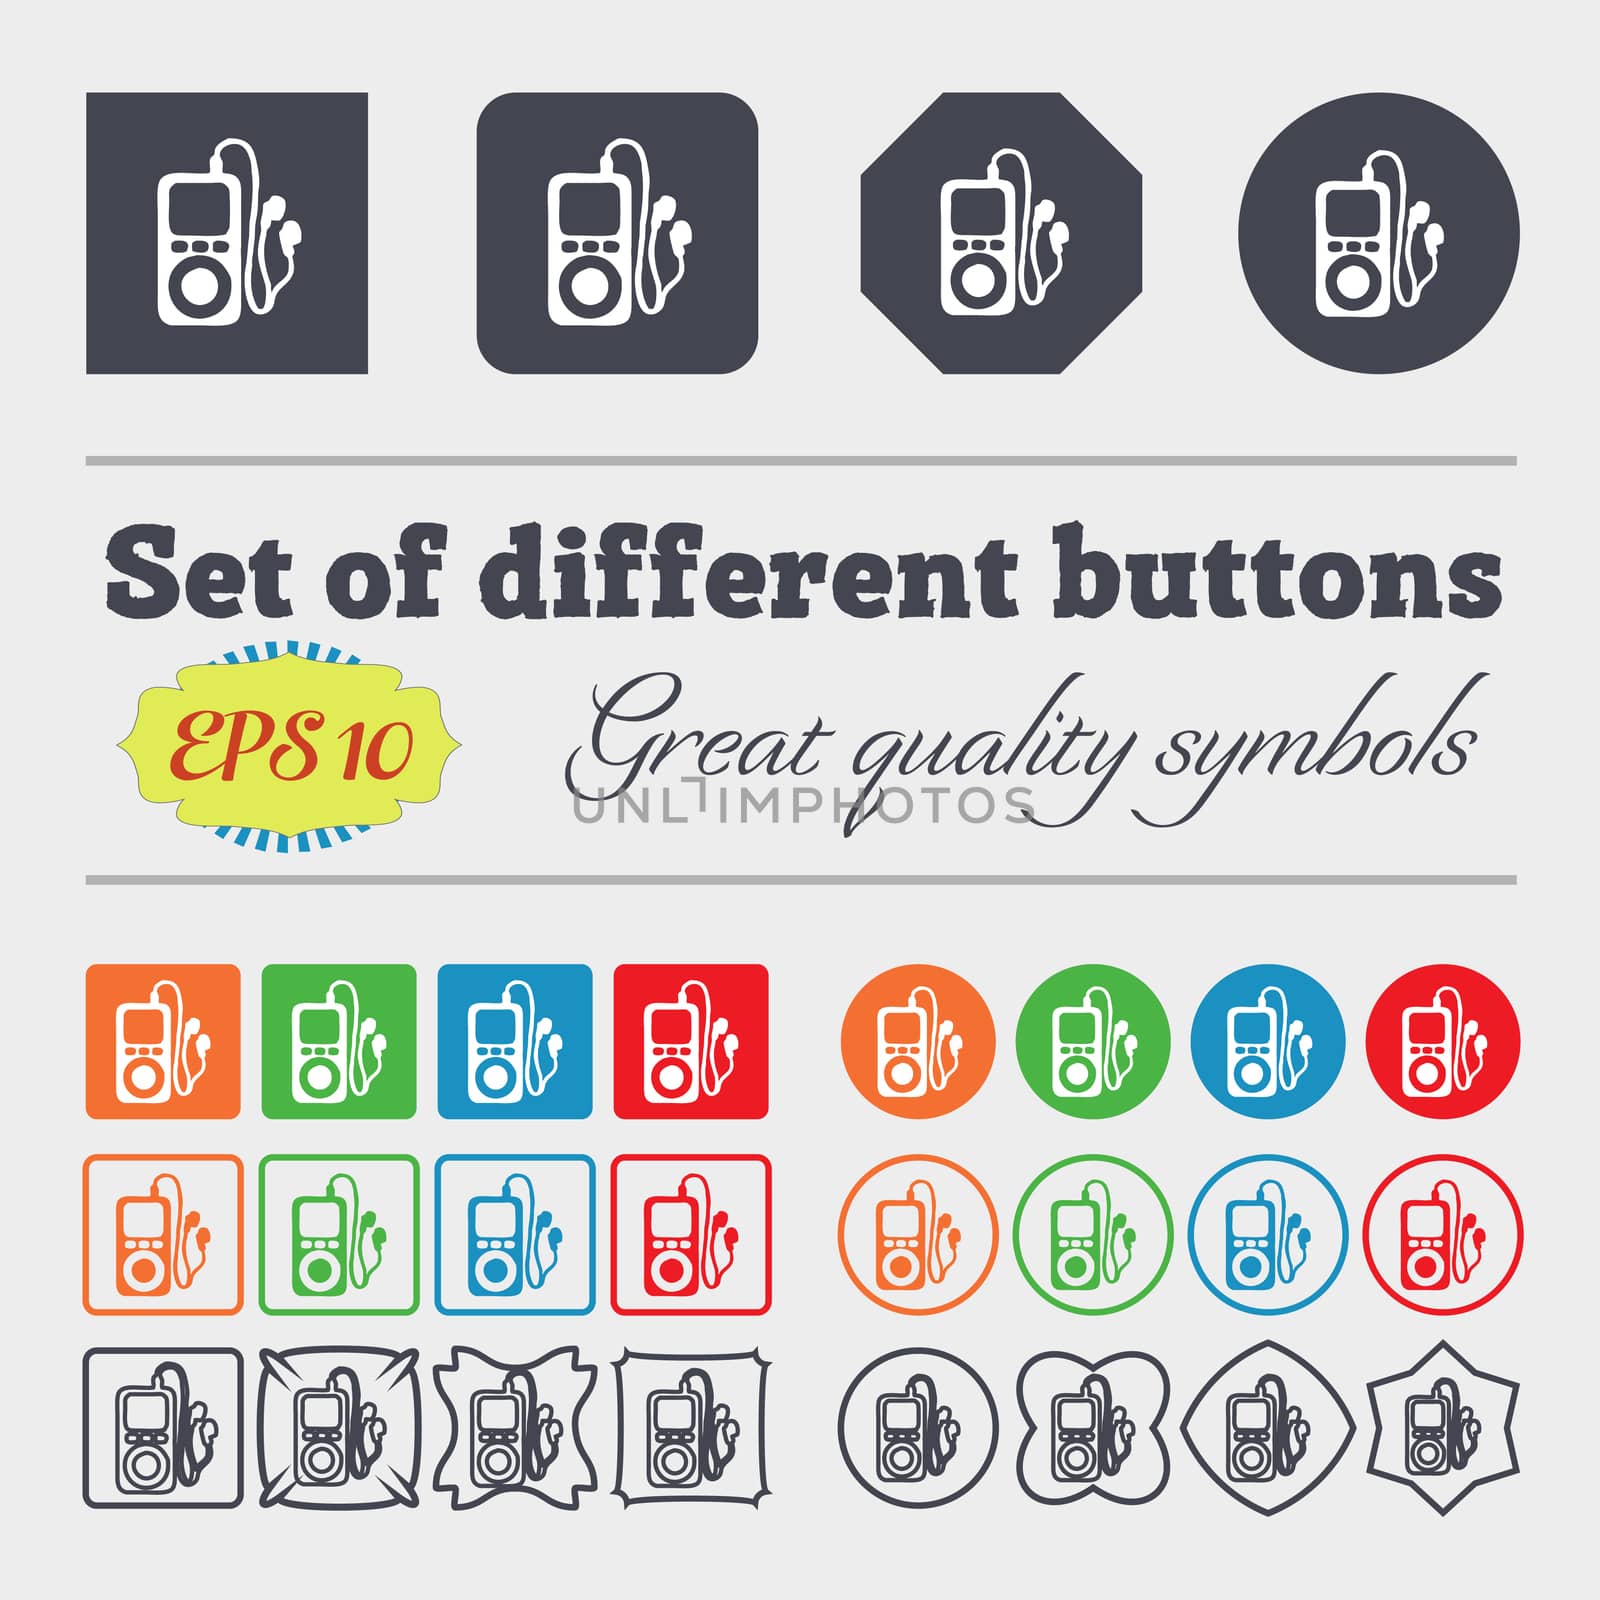 MP3 player, headphones, music icon sign. Big set of colorful, diverse, high-quality buttons. illustration